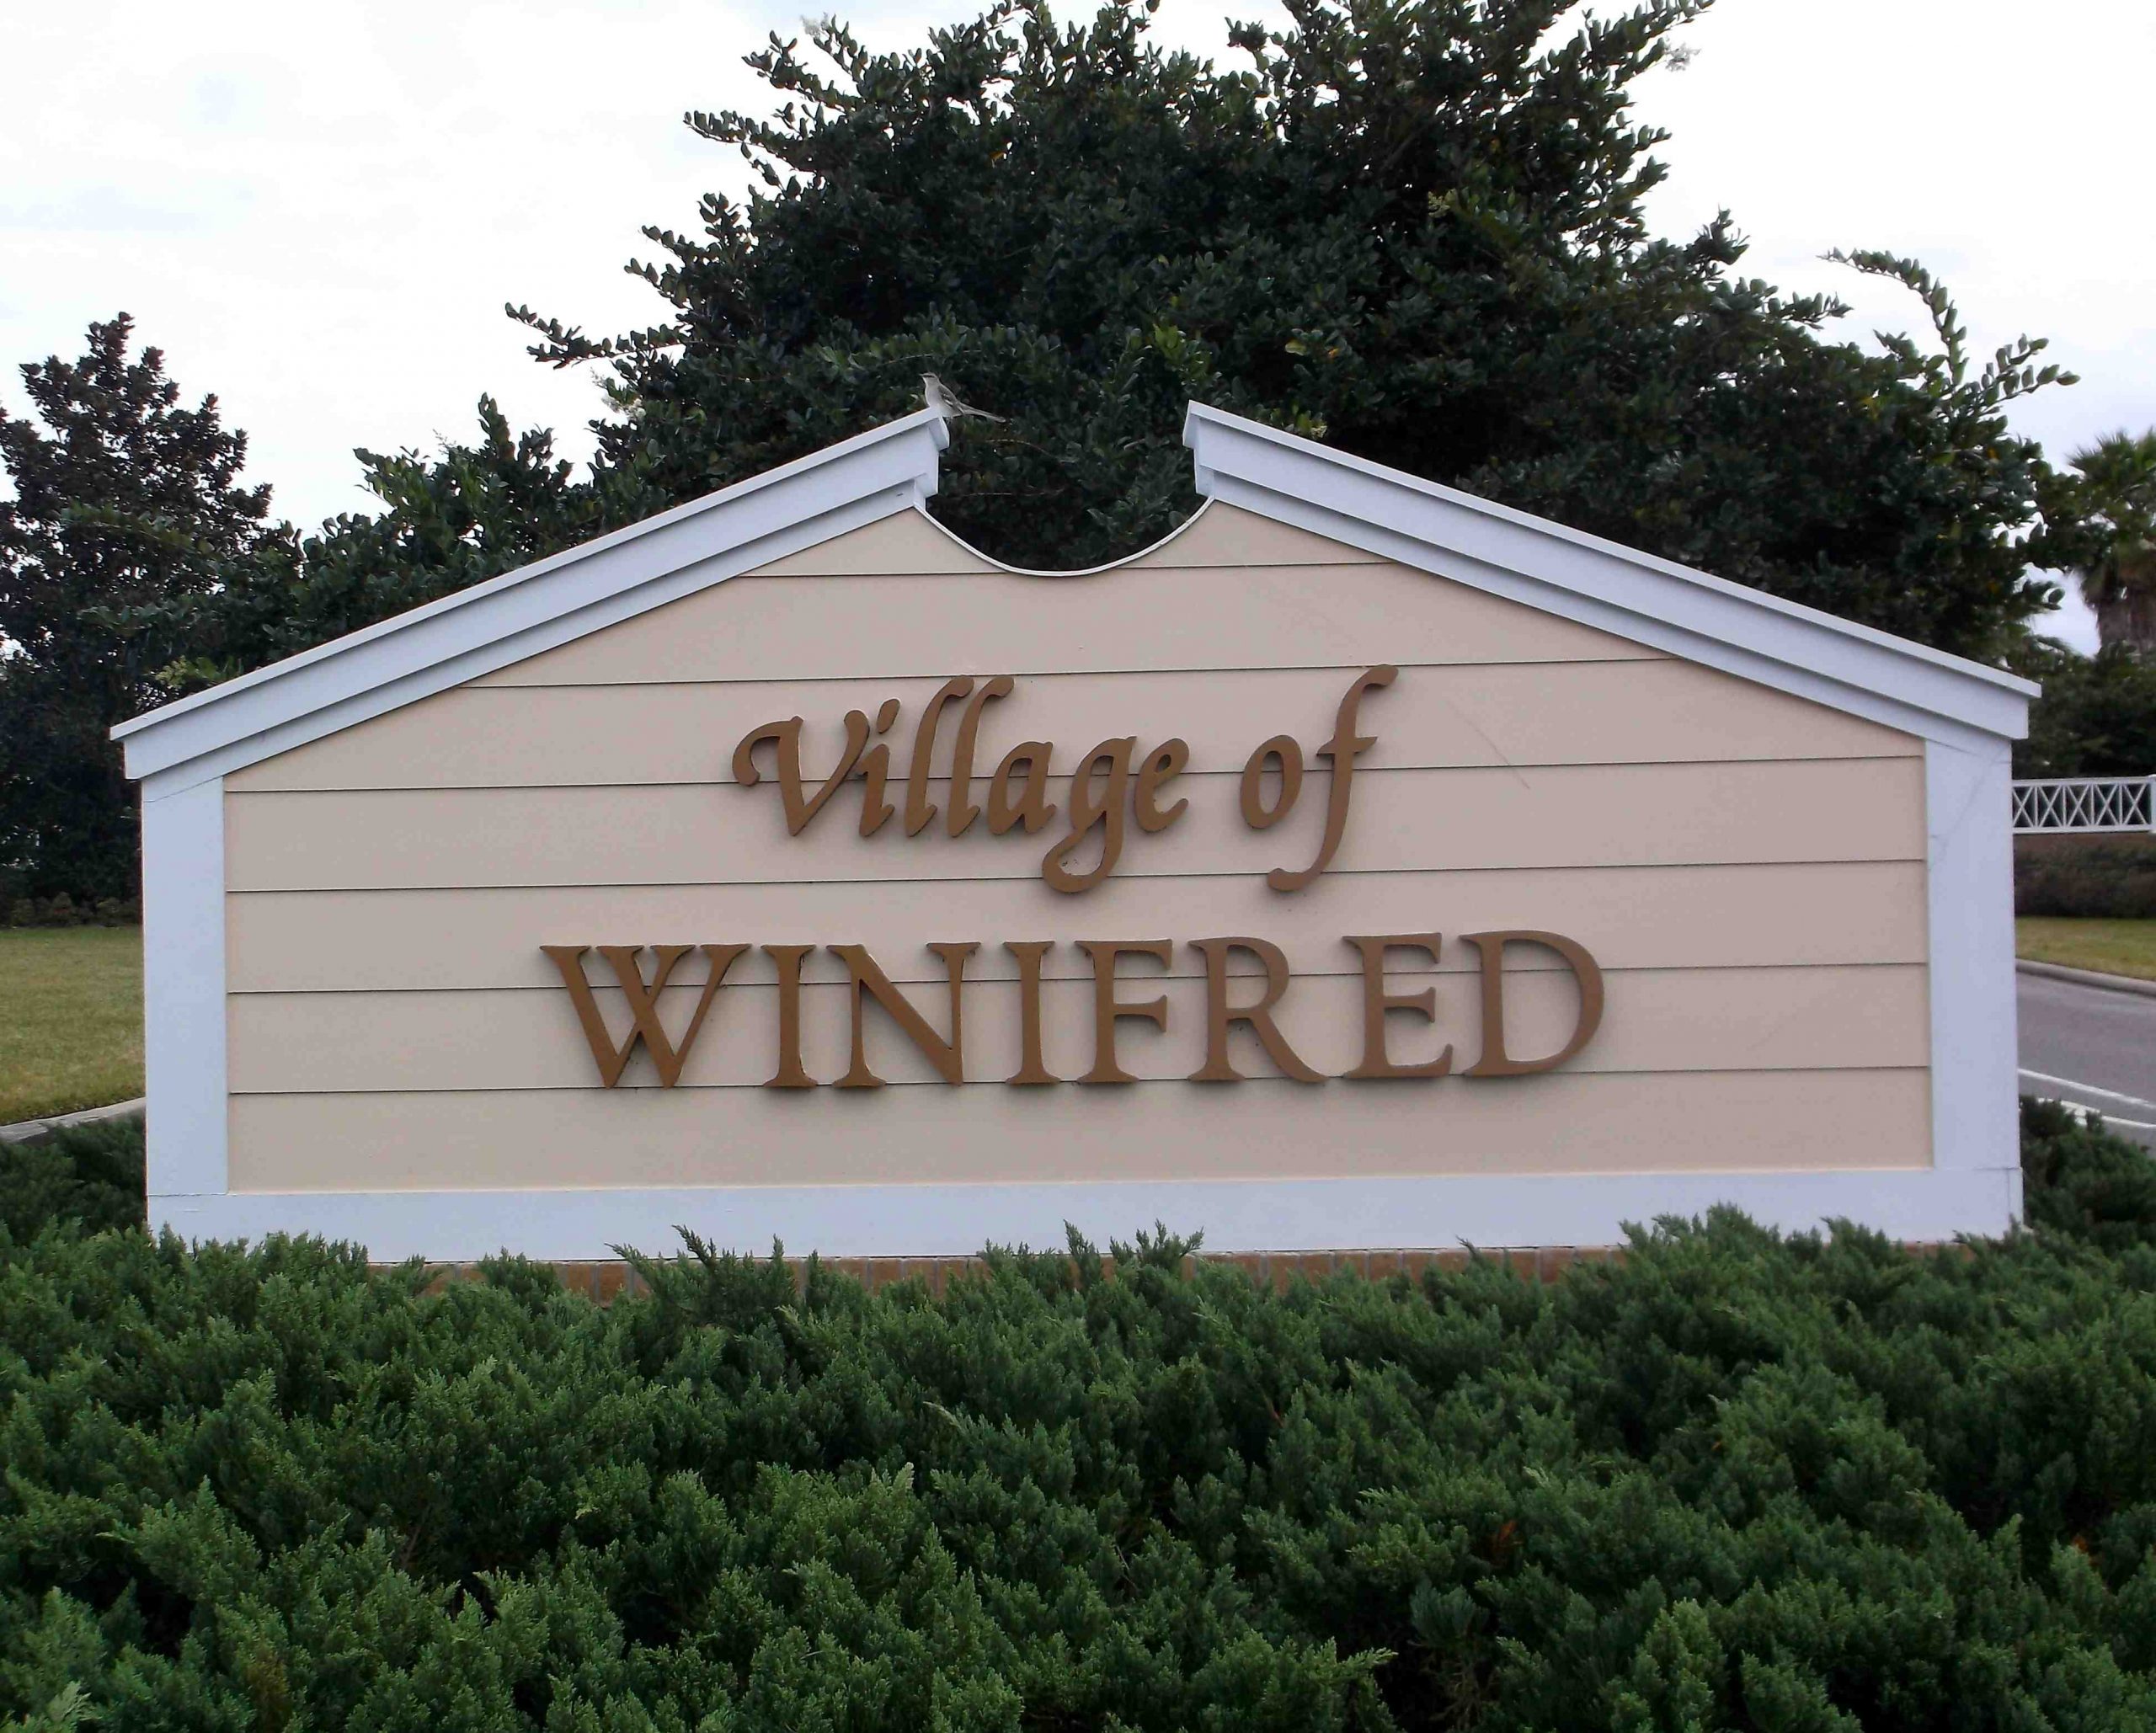 Residents asked to cut back landscaping ahead of fence replacement in Village of Winifred